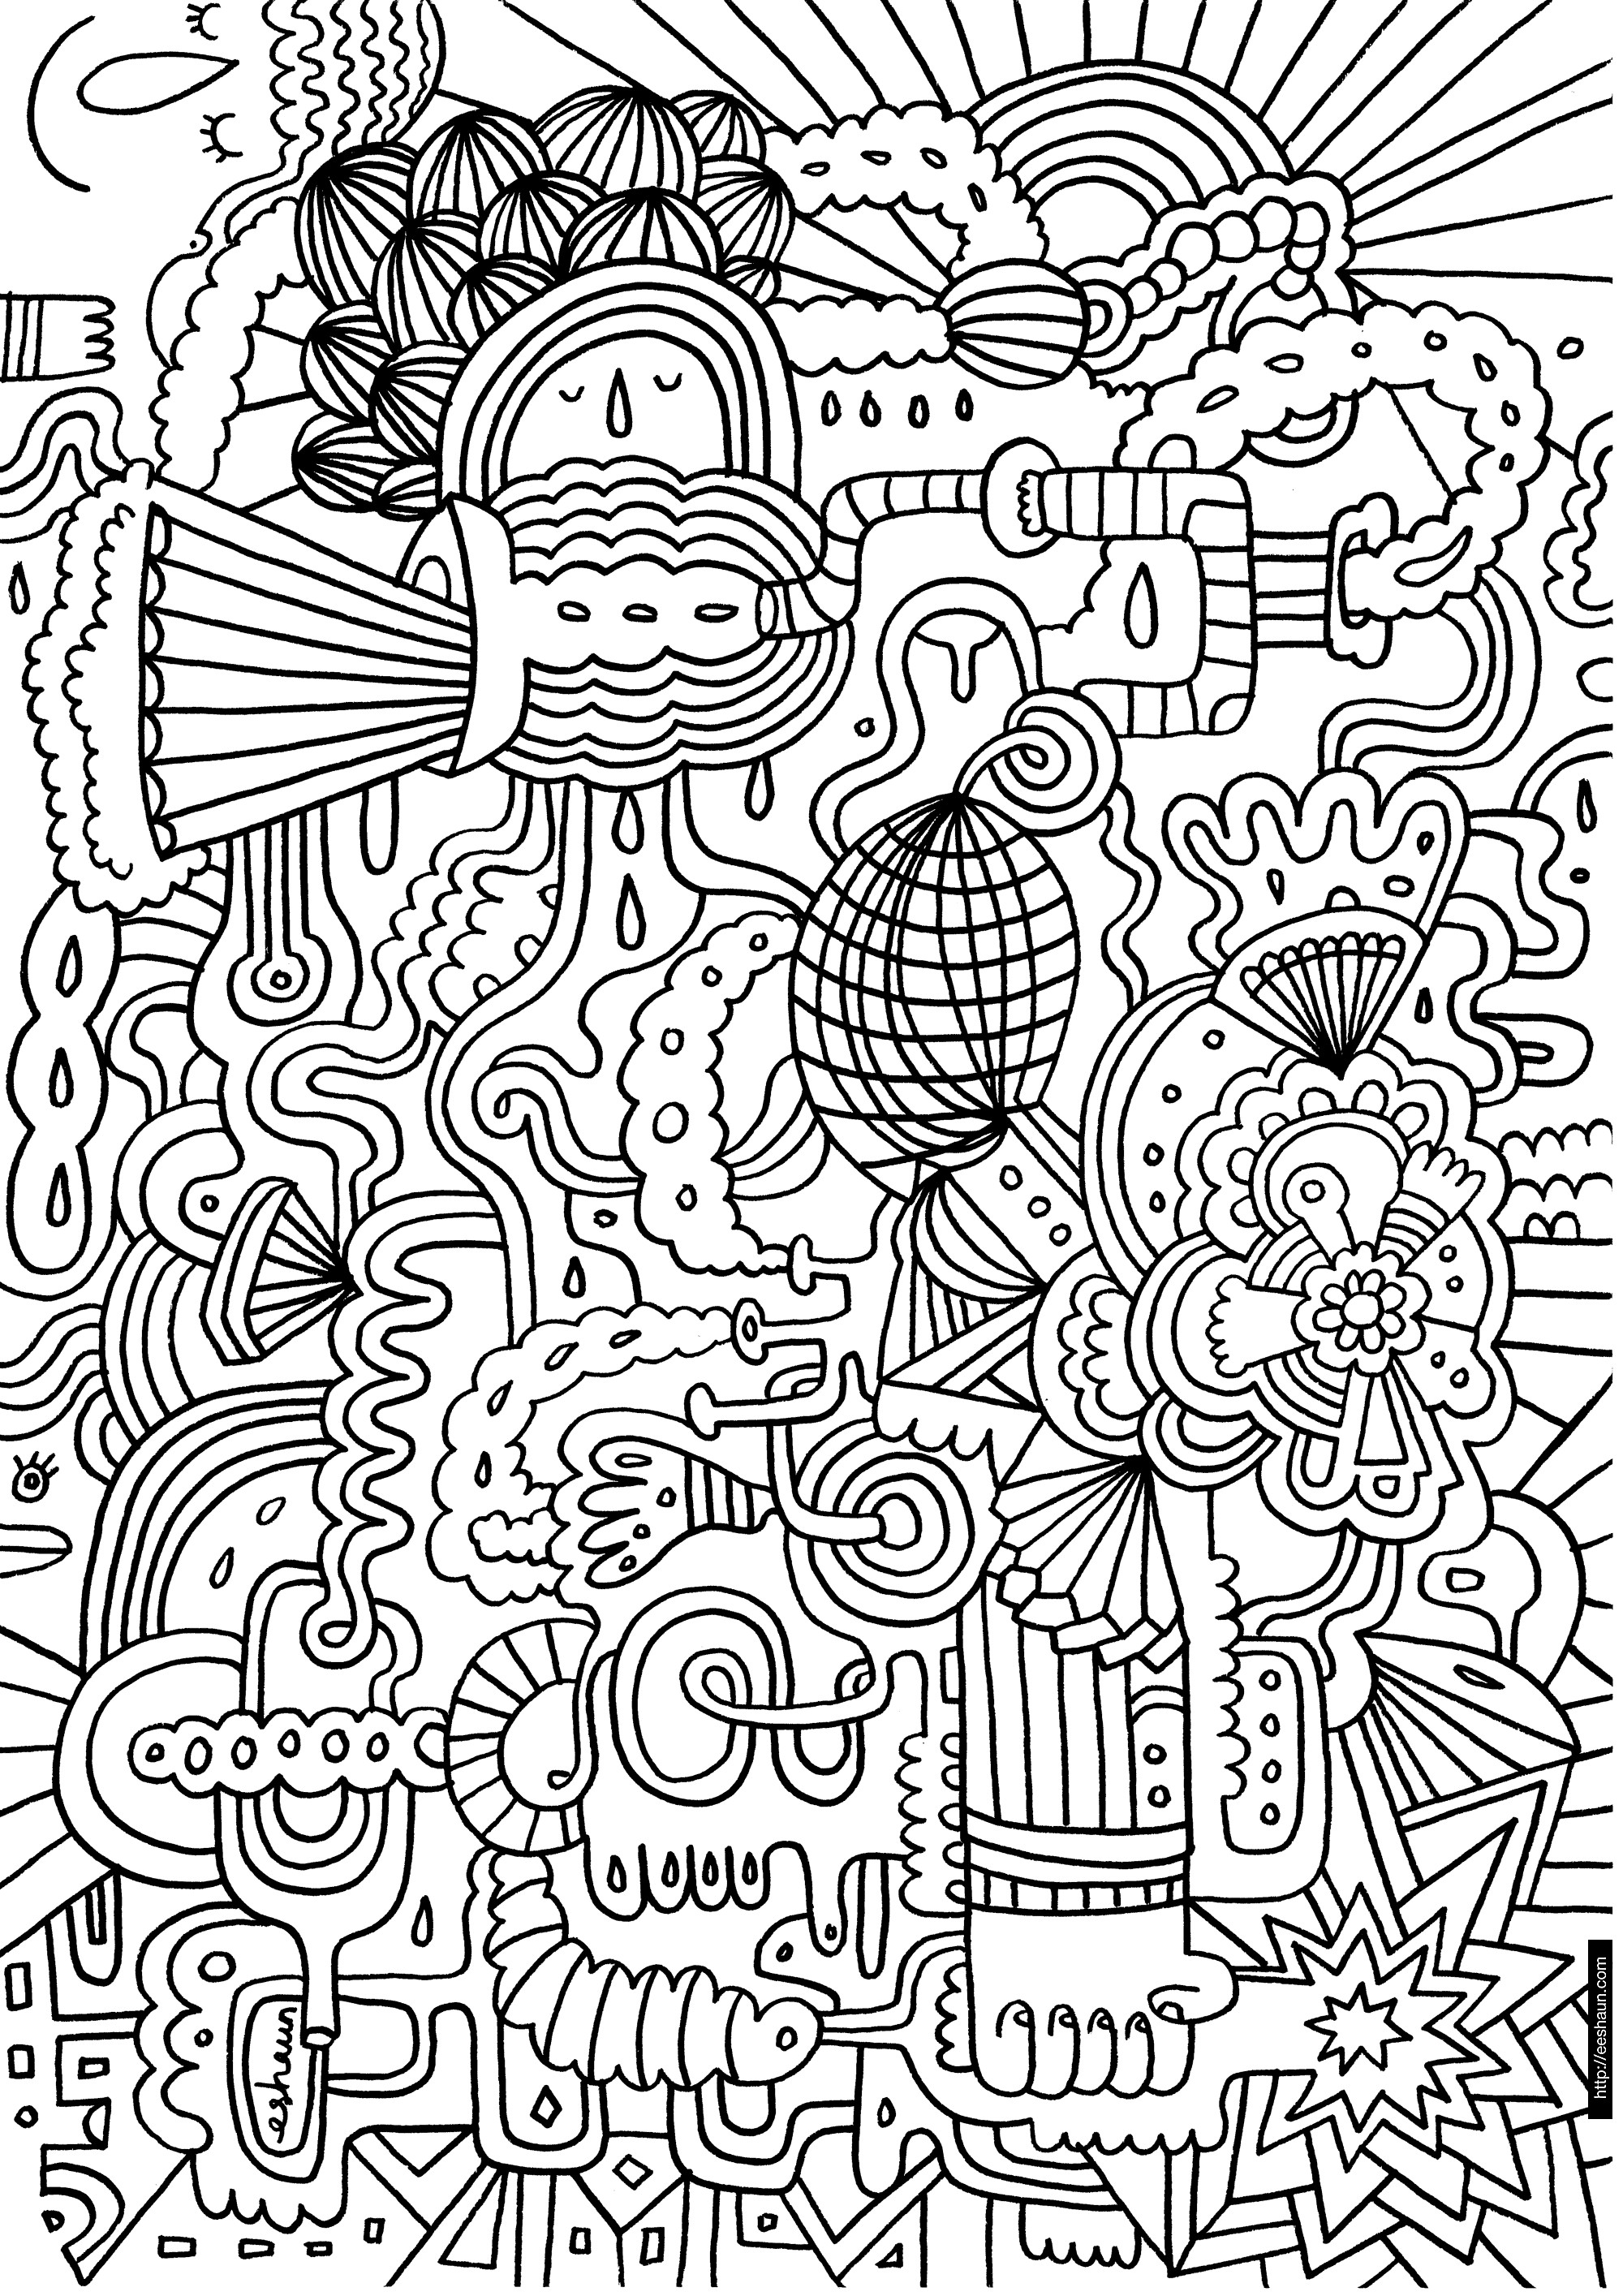 Coloring Sheets For Boys Challening
 Hard Coloring Pages Best Cool Funny